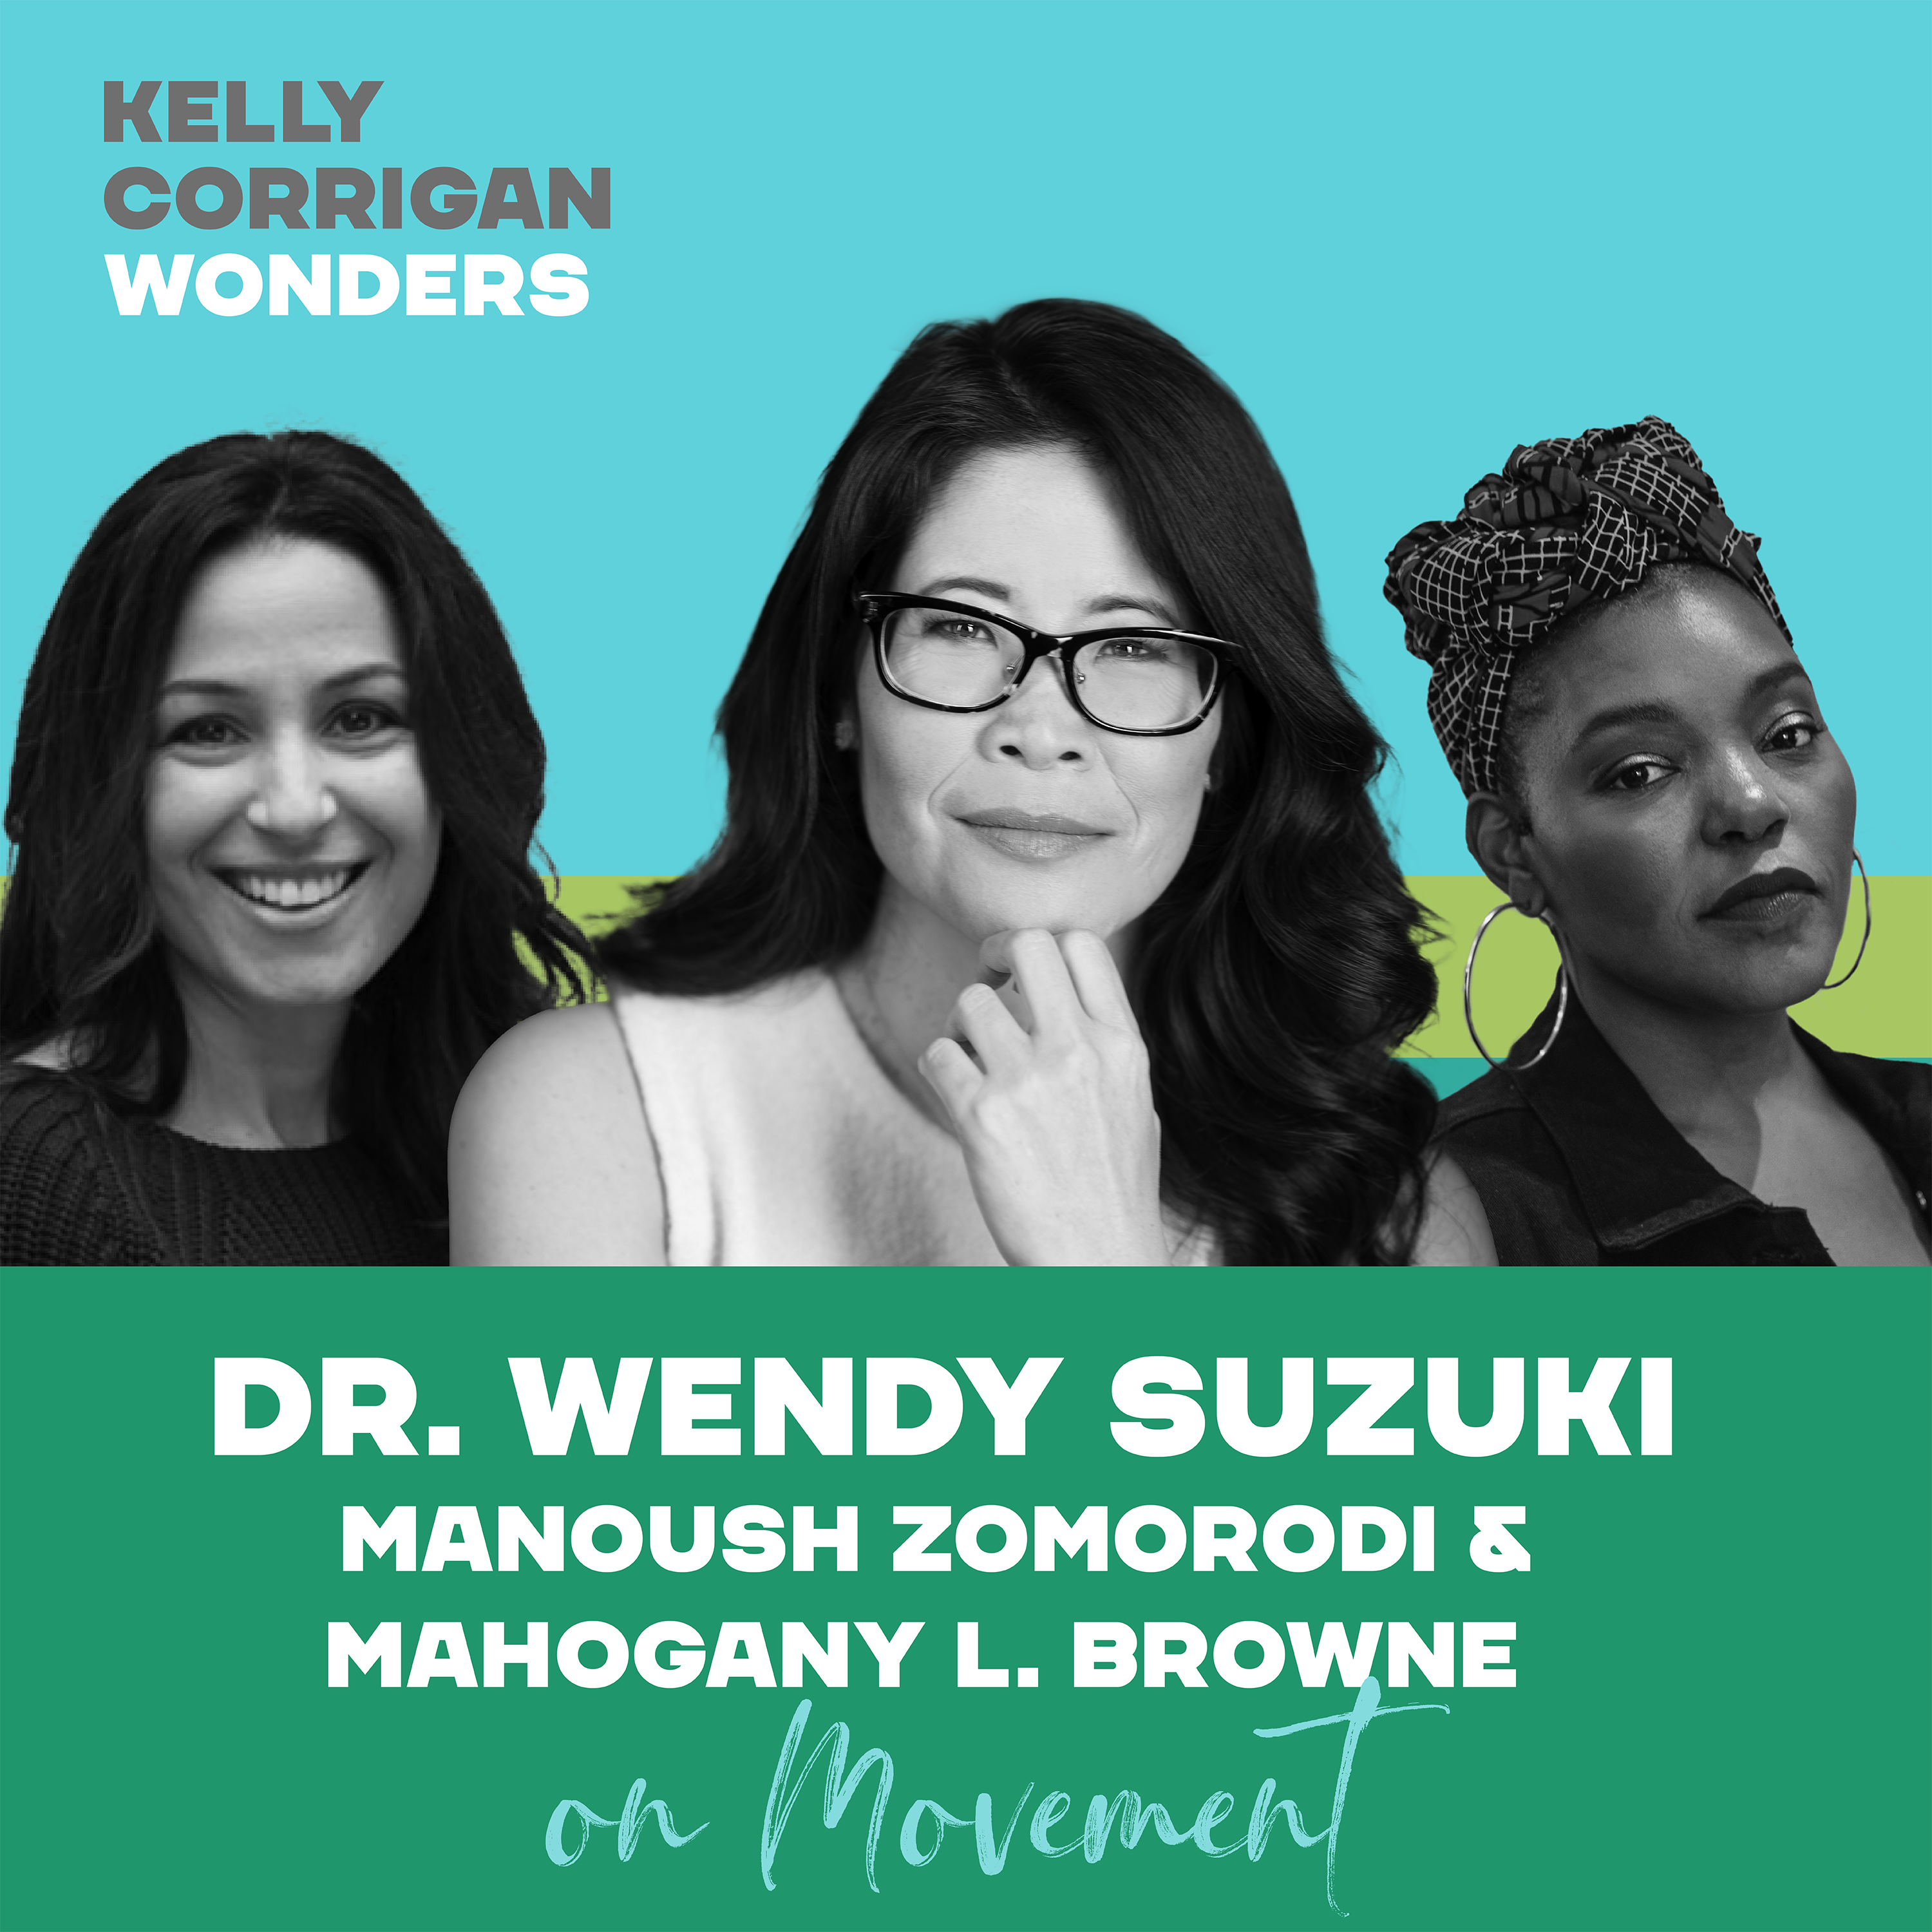 Going Deep on Movement and Well Being with Wendy Suzuki, Manoush Zomorodi and Mahogany L. Browne